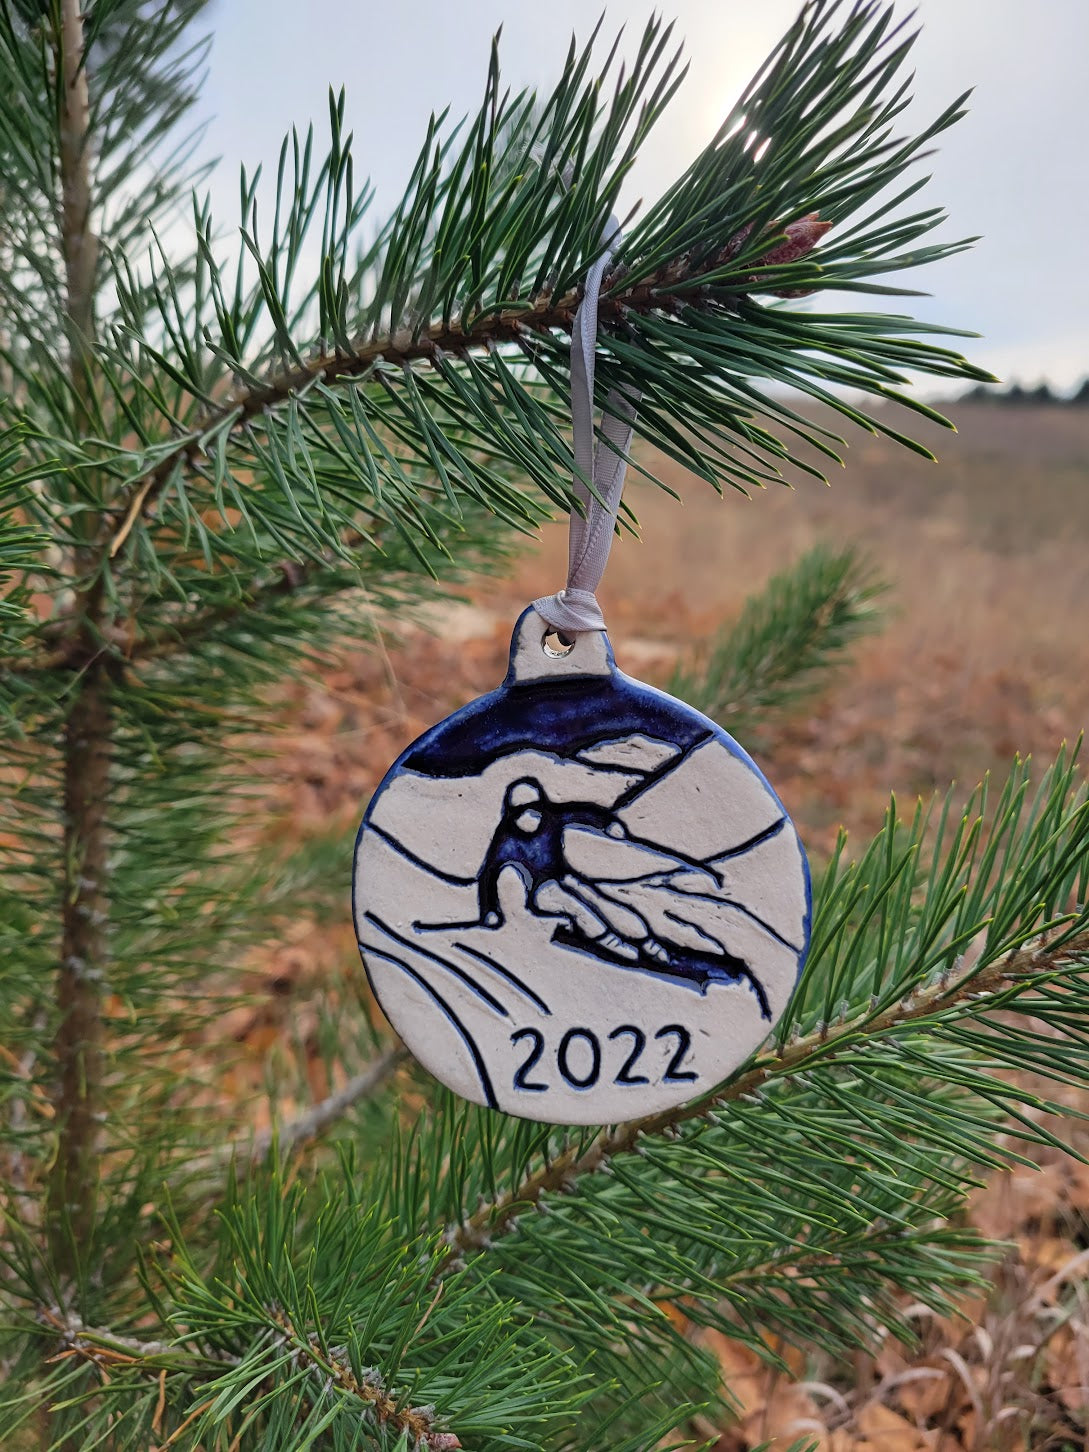 2022 LIMITED EDITION ORNAMENT